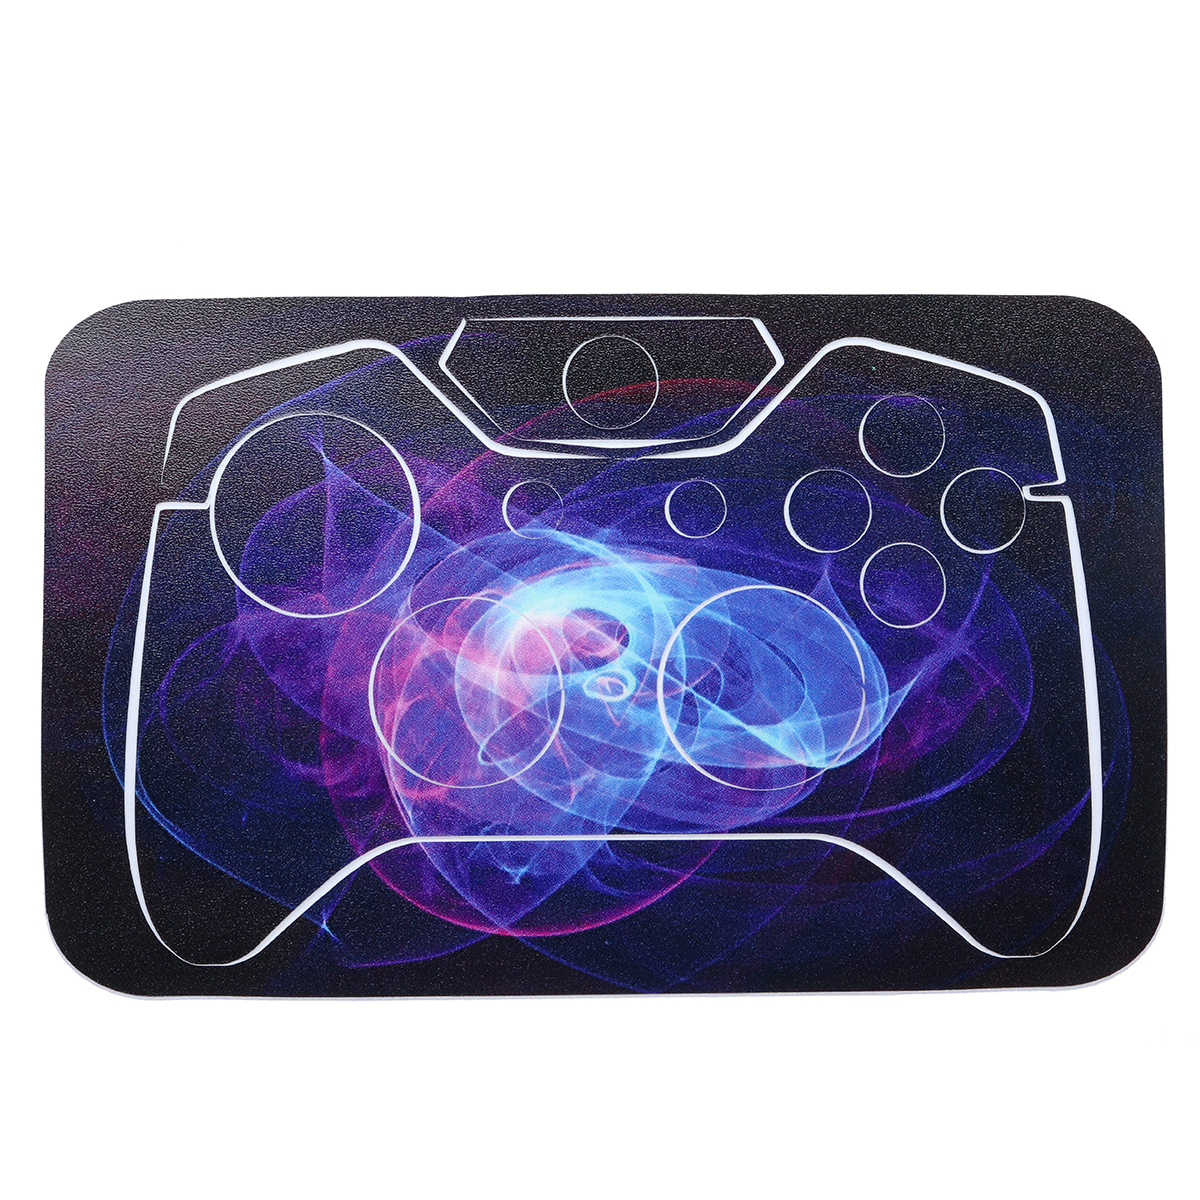 Purple Protective Vinyl Decal Skin Stickers Wrap Cover For Xbox One Game Console Game Controller Kinect 31